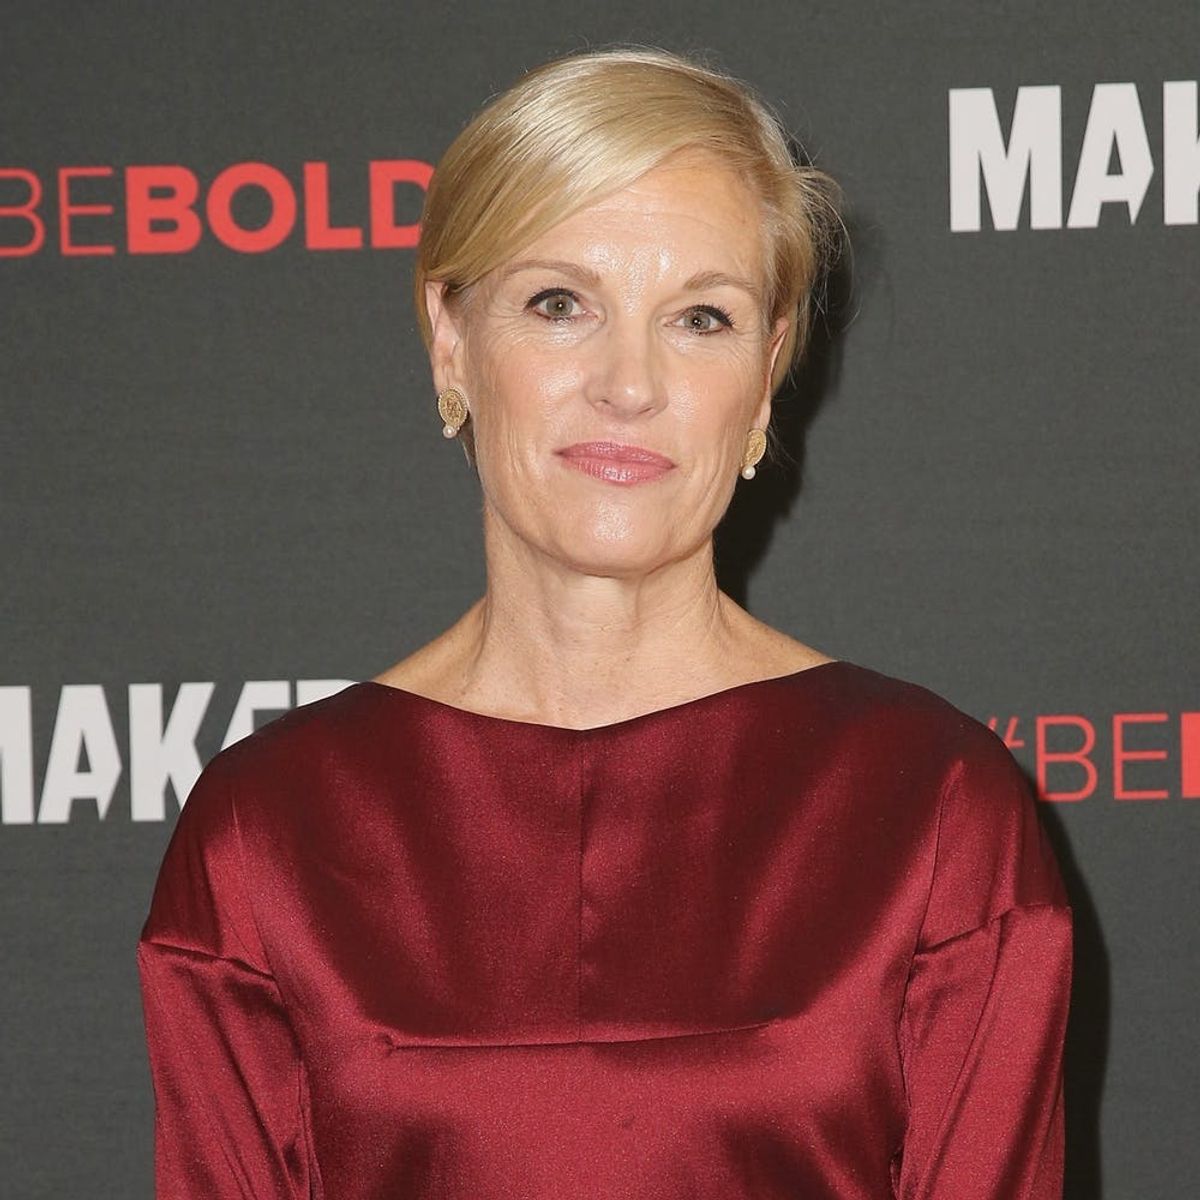 Cecile Richards Talks About How Tech Is Standing Up for Planned Parenthood at SXSW